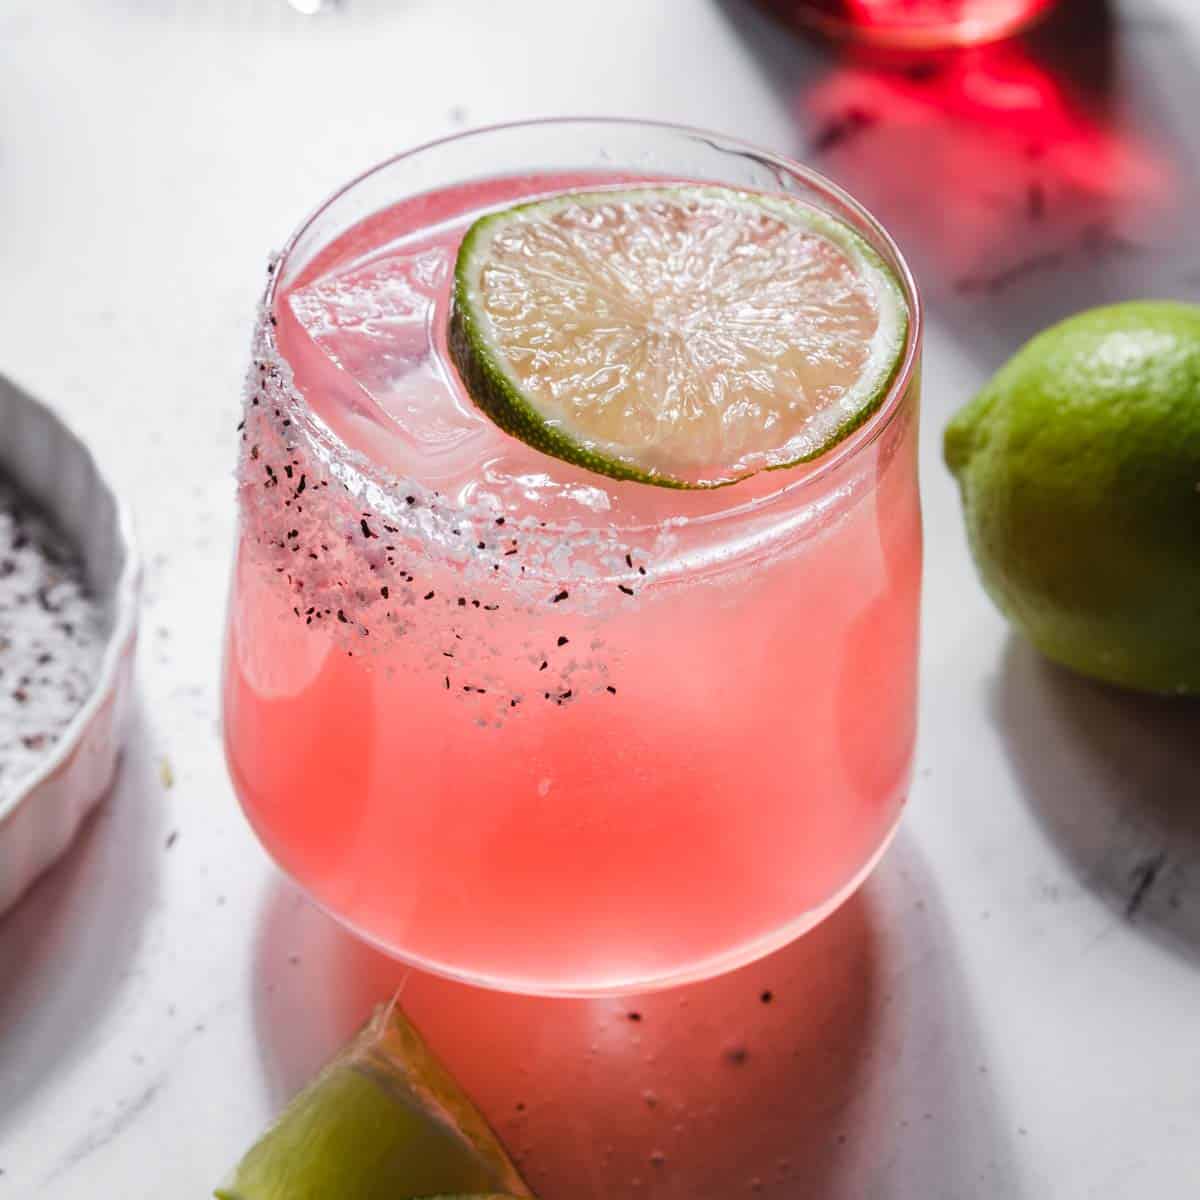 A glass of pink hibiscus margarita on the rocks with a floating lime wheel garnish